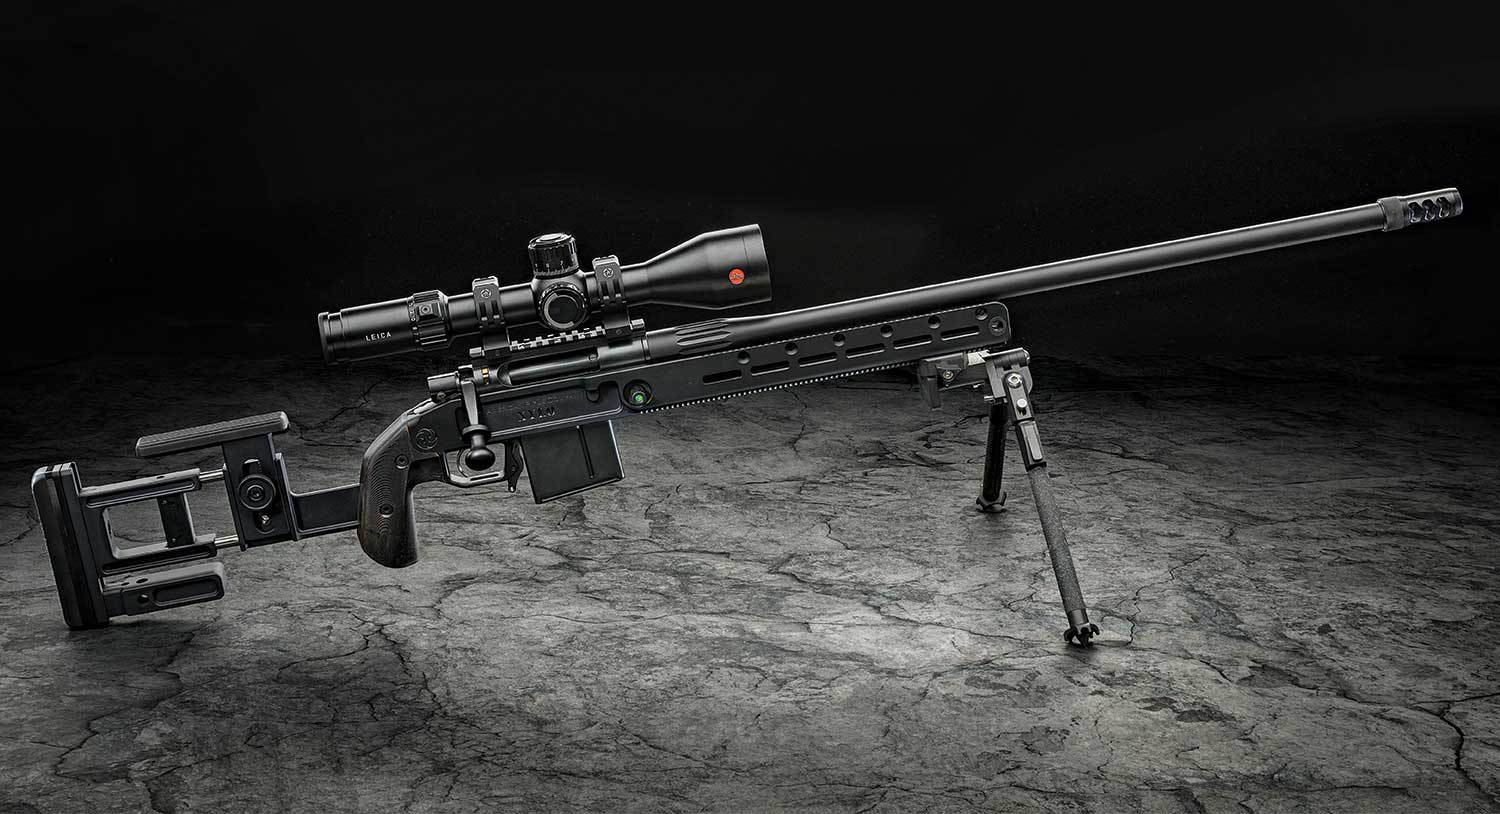 An American Rifle Company Nucleus Gen2 rifle on shooting sticks and a Leica Riflescope.